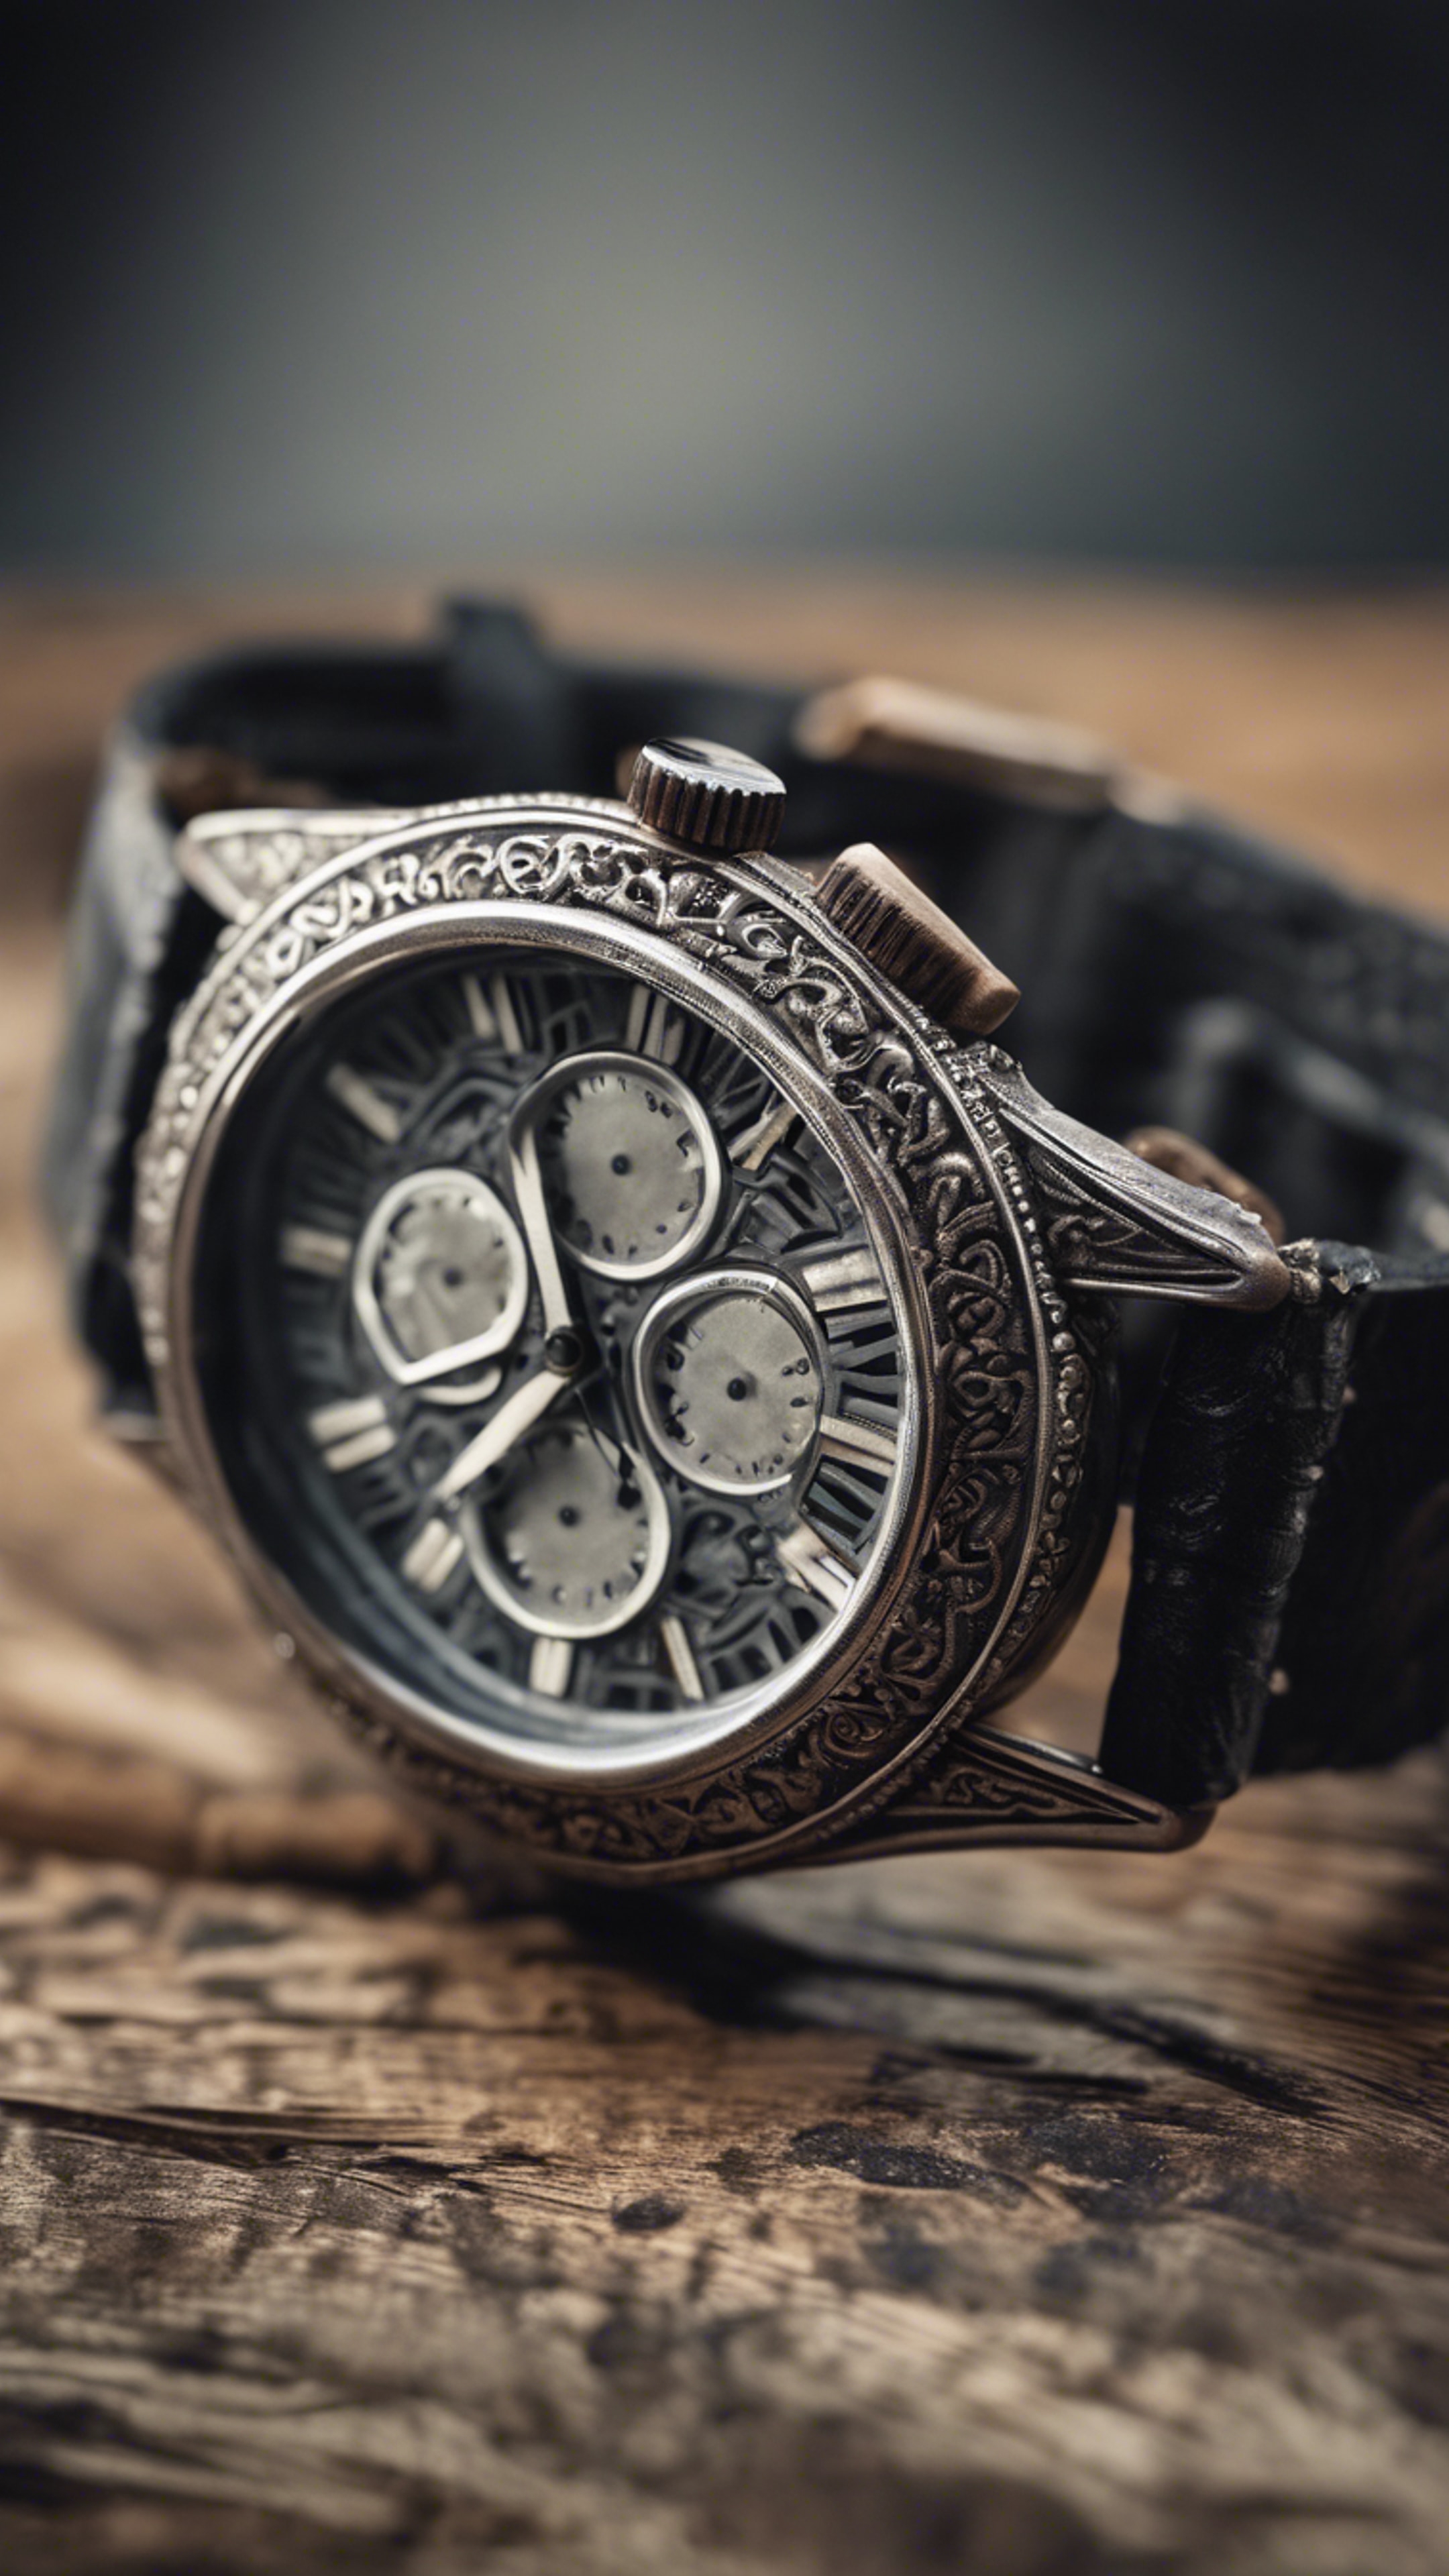 An antique, rustic, black and gray wristwatch with intricate details in its design. Валлпапер[fa36b50287764cf98f6d]